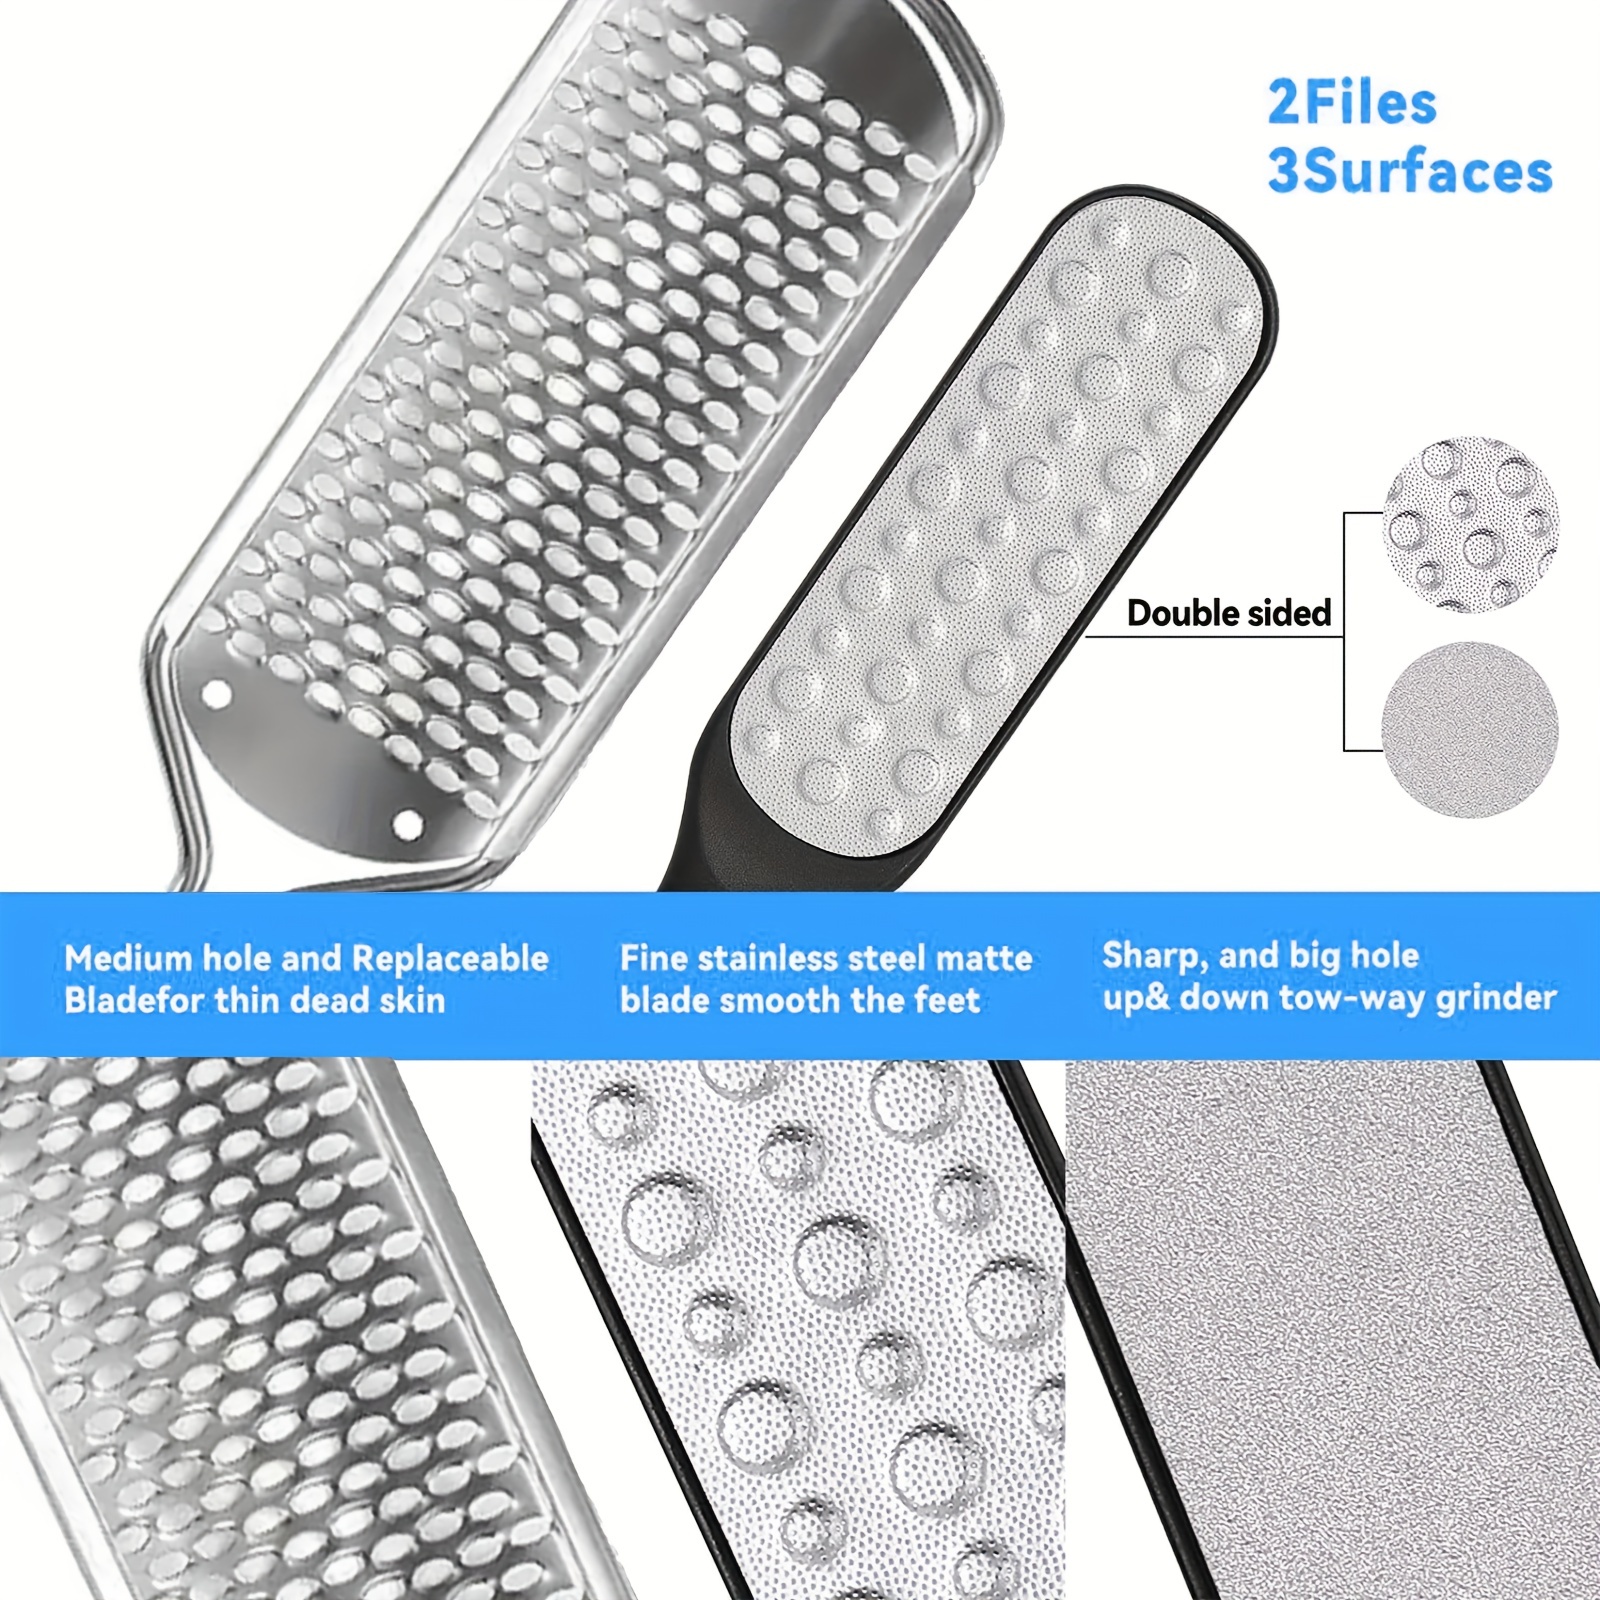 2Pcs Pedicure Rasp Foot File Callus Remover,Professional Stainless Steel  Colossal and Fine Foot Scrubber Remove Dead Skin for Wet and Dry Feet